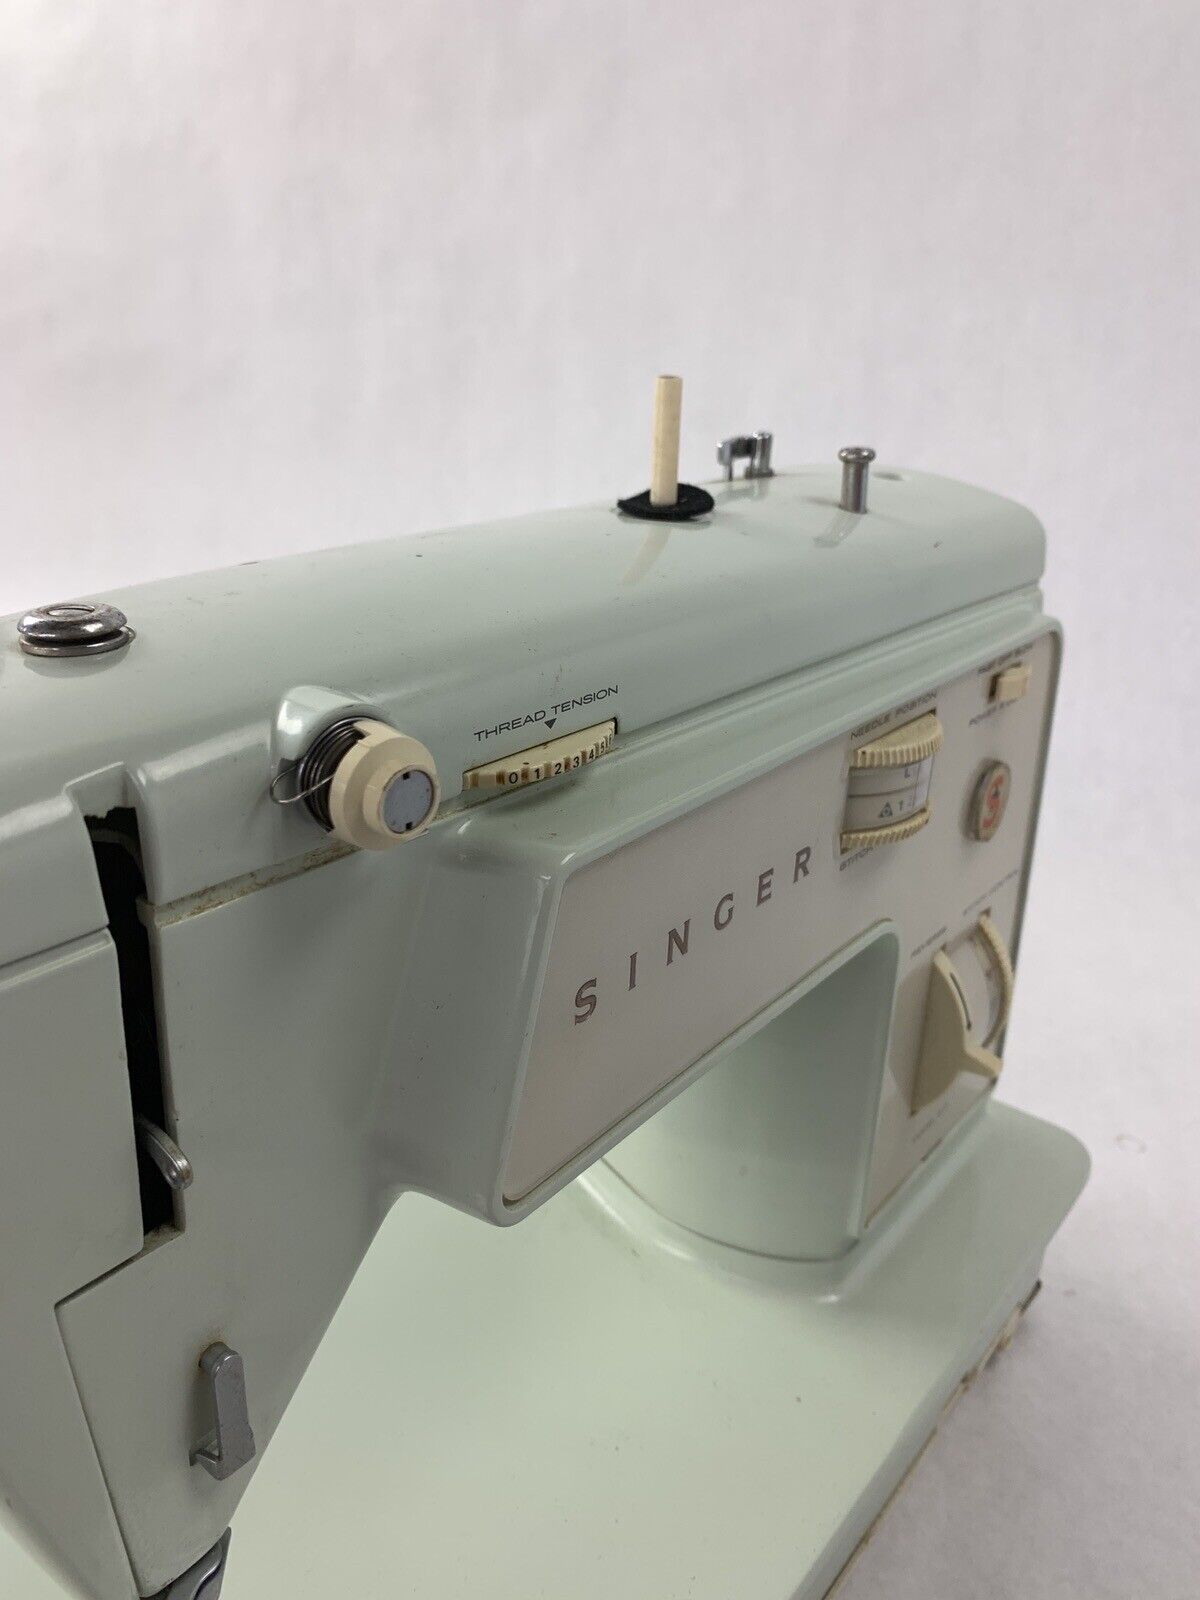 SINGER Stitch Quick + (Two Thread) Hand Held Mending Macao